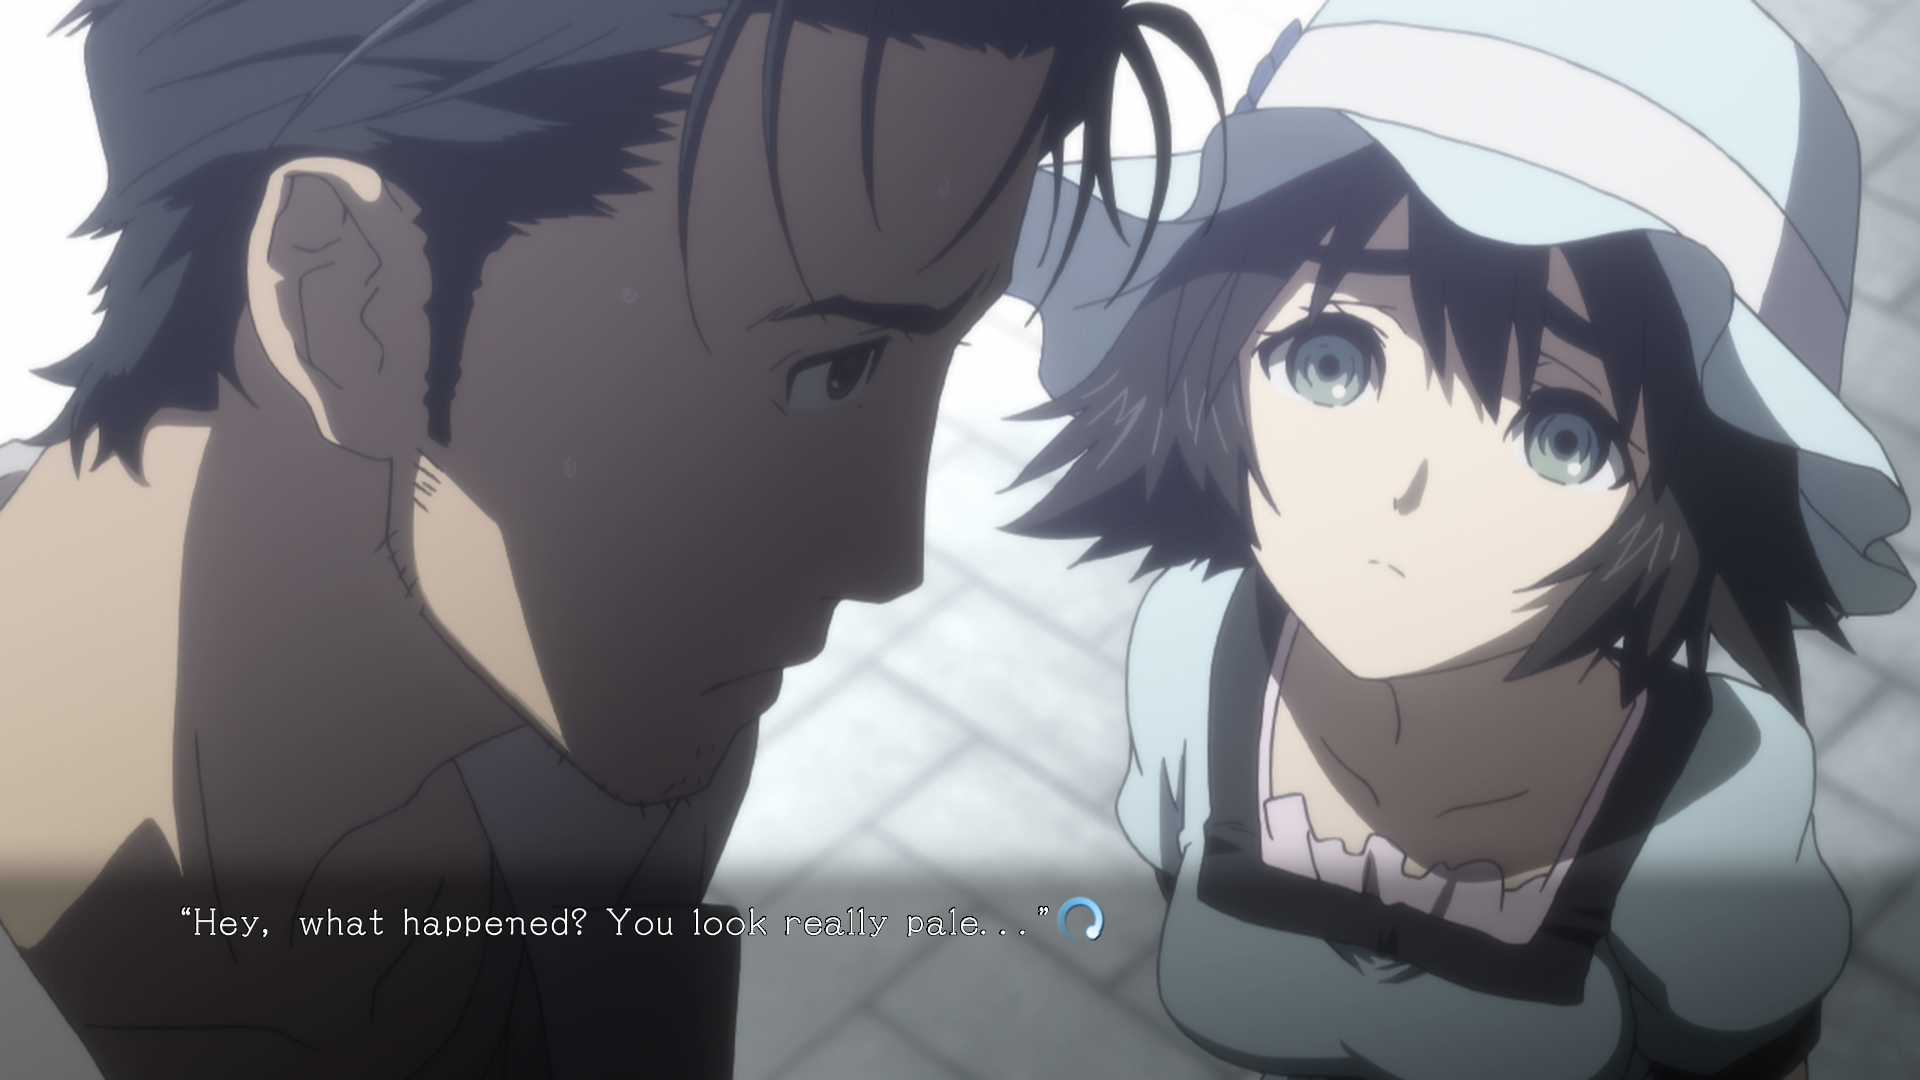 Steins;Gate: Should you watch the anime or play the visual novel?